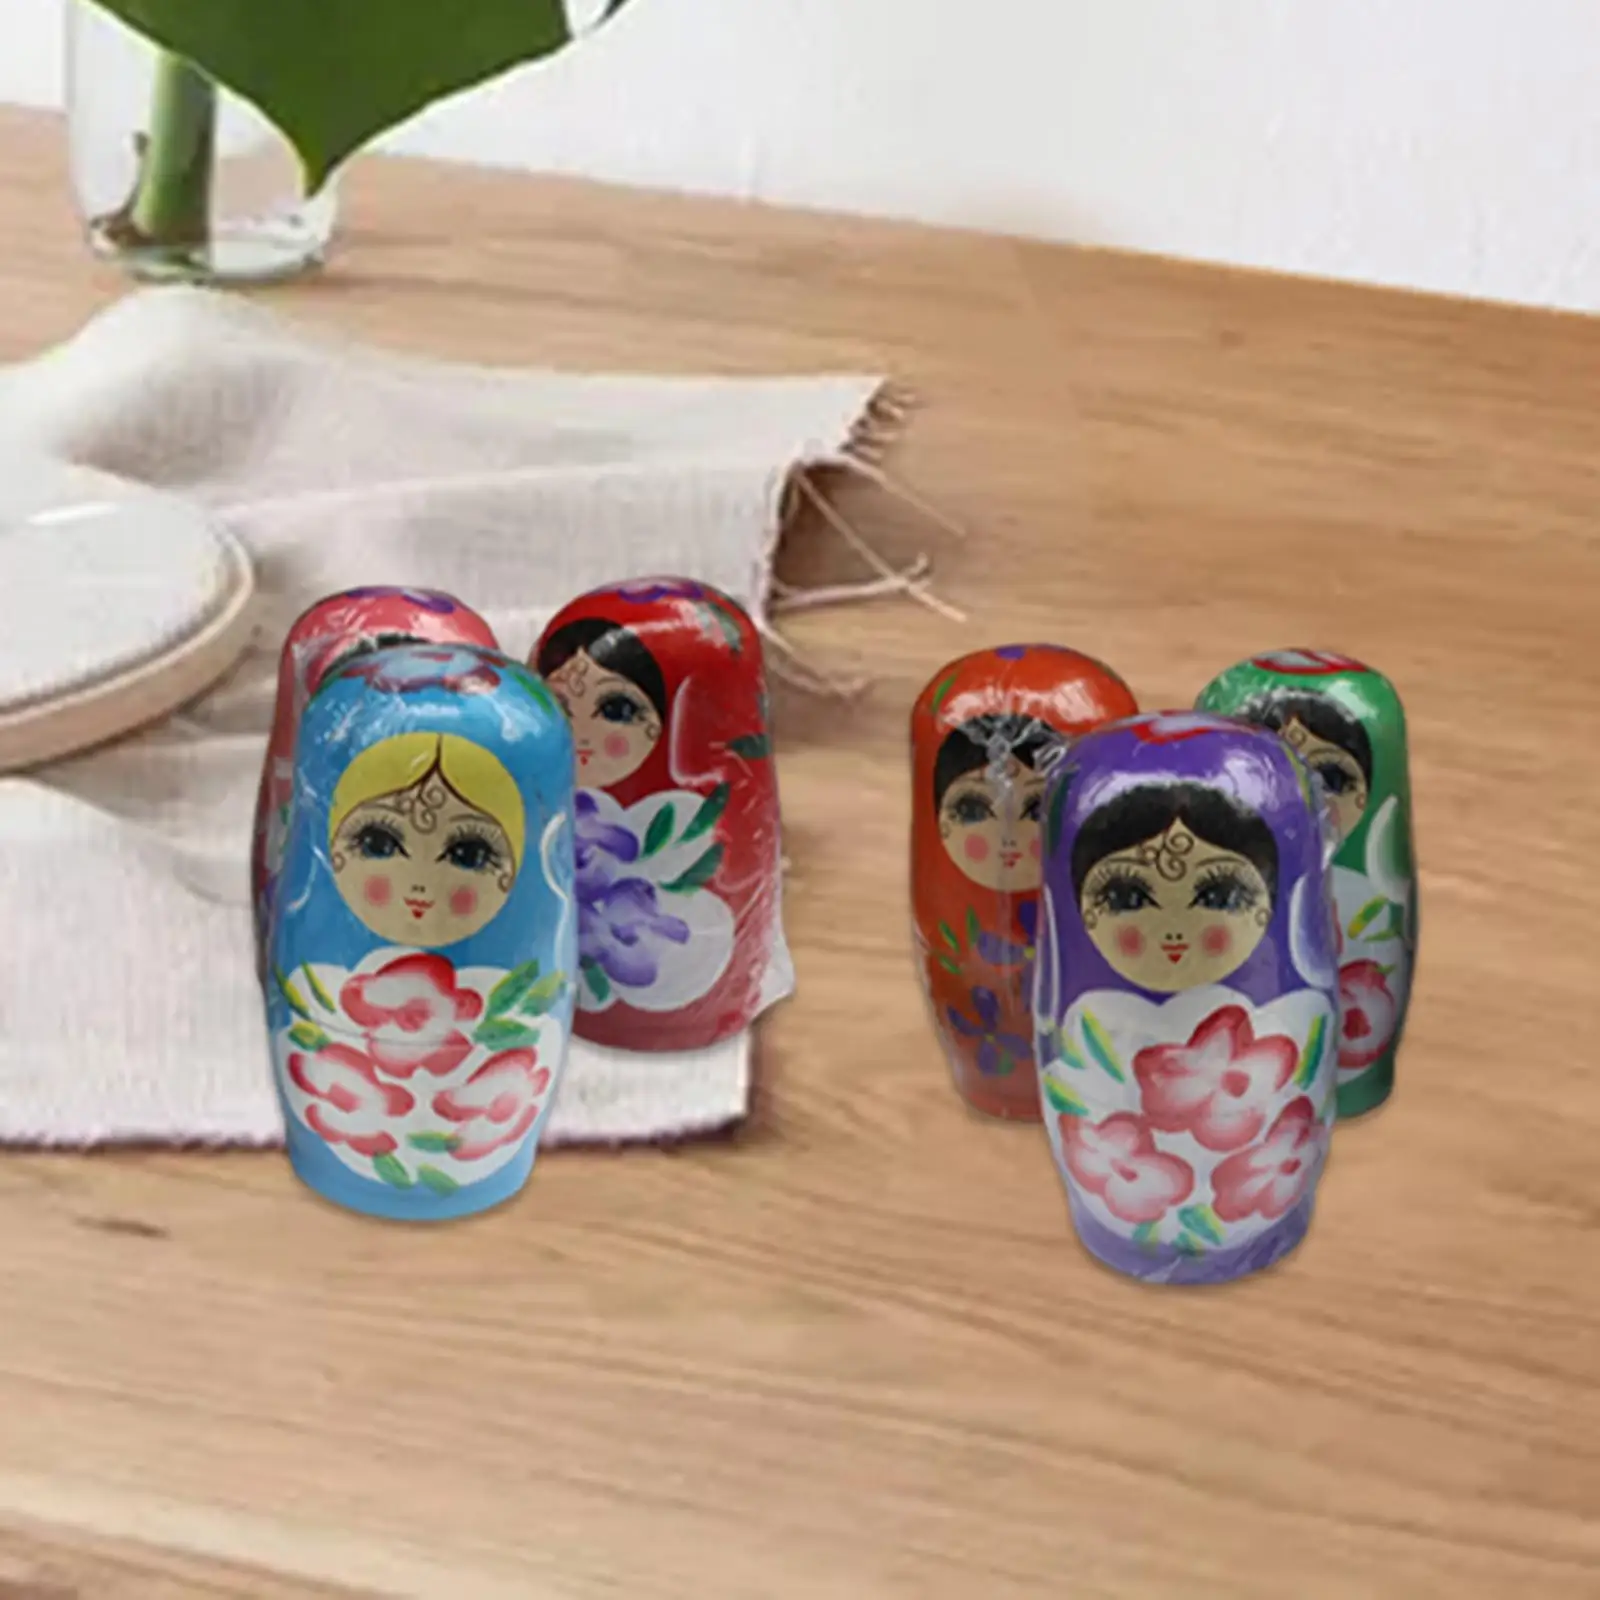 5x Handmade Russian Nesting Doll Stacking Figures Collectible Crafts Wooden Matryoshka Dolls for Room Office home Ornament